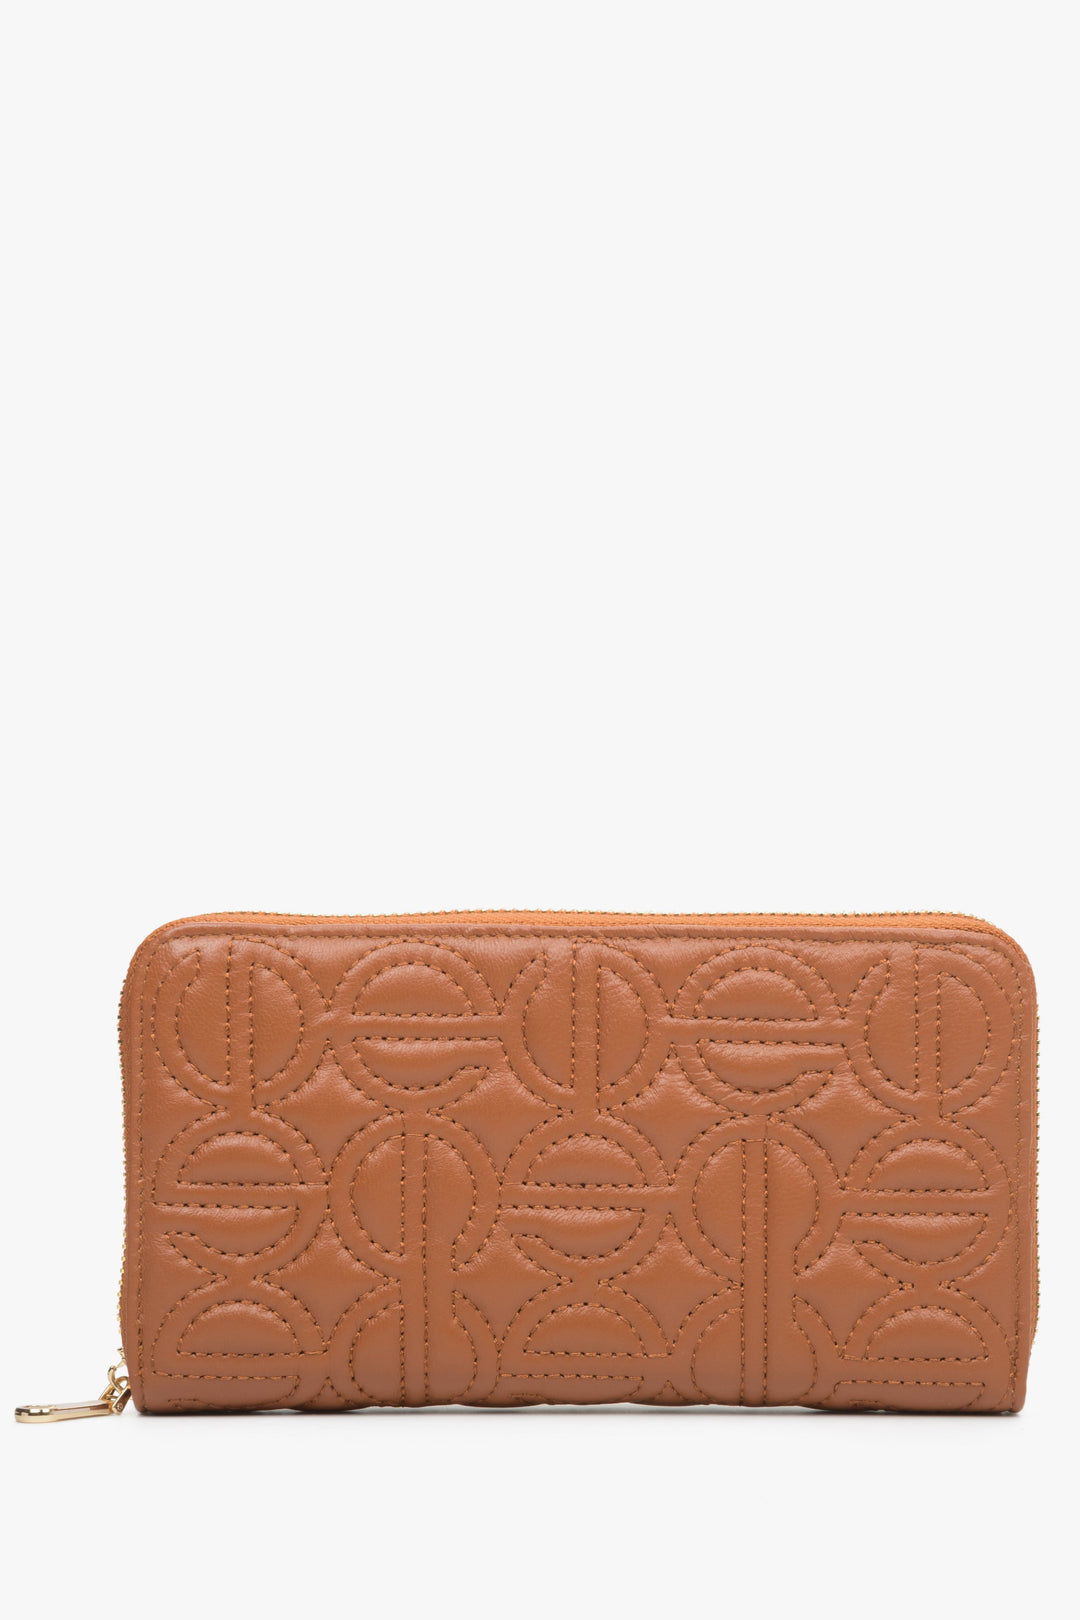 Brown leather women's continental wallet with embossed Estro brand logo.